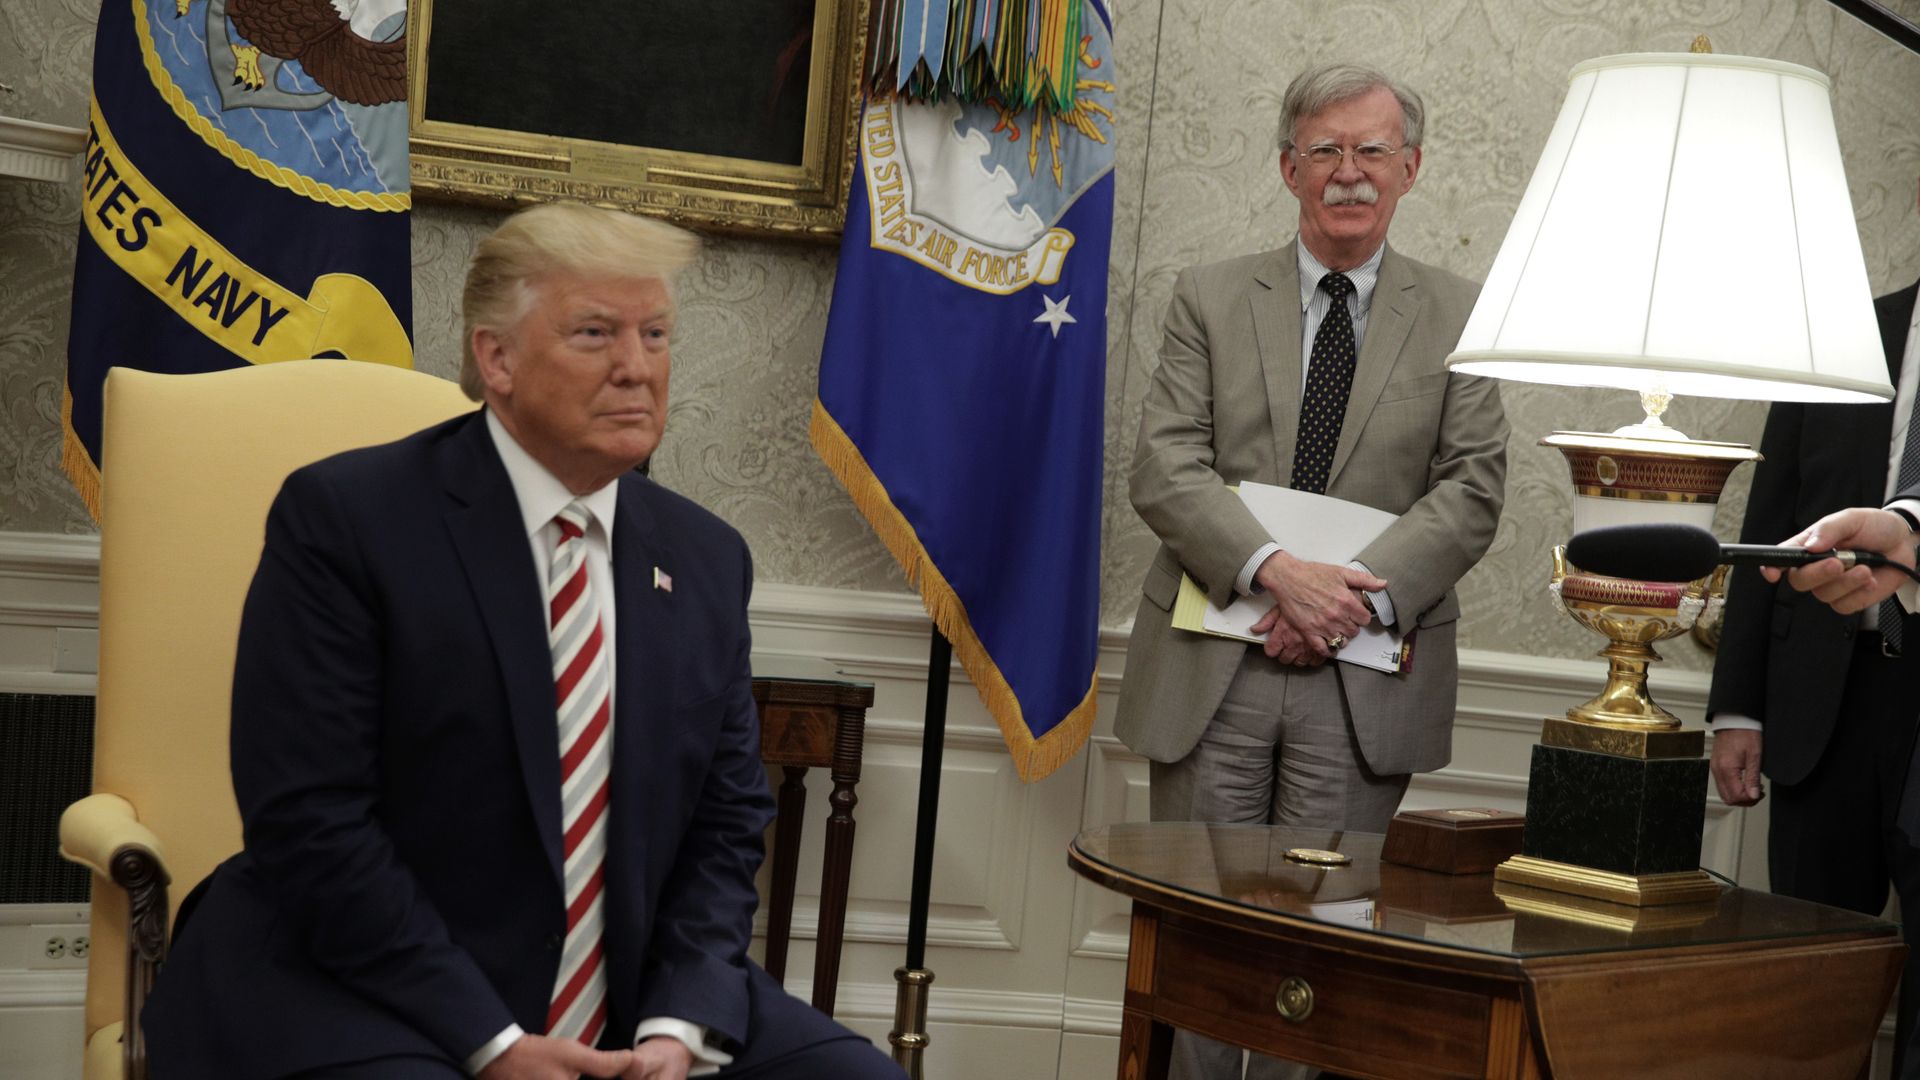 Photo of John Bolton standing behind Donald Trump as Trump is being interviewed